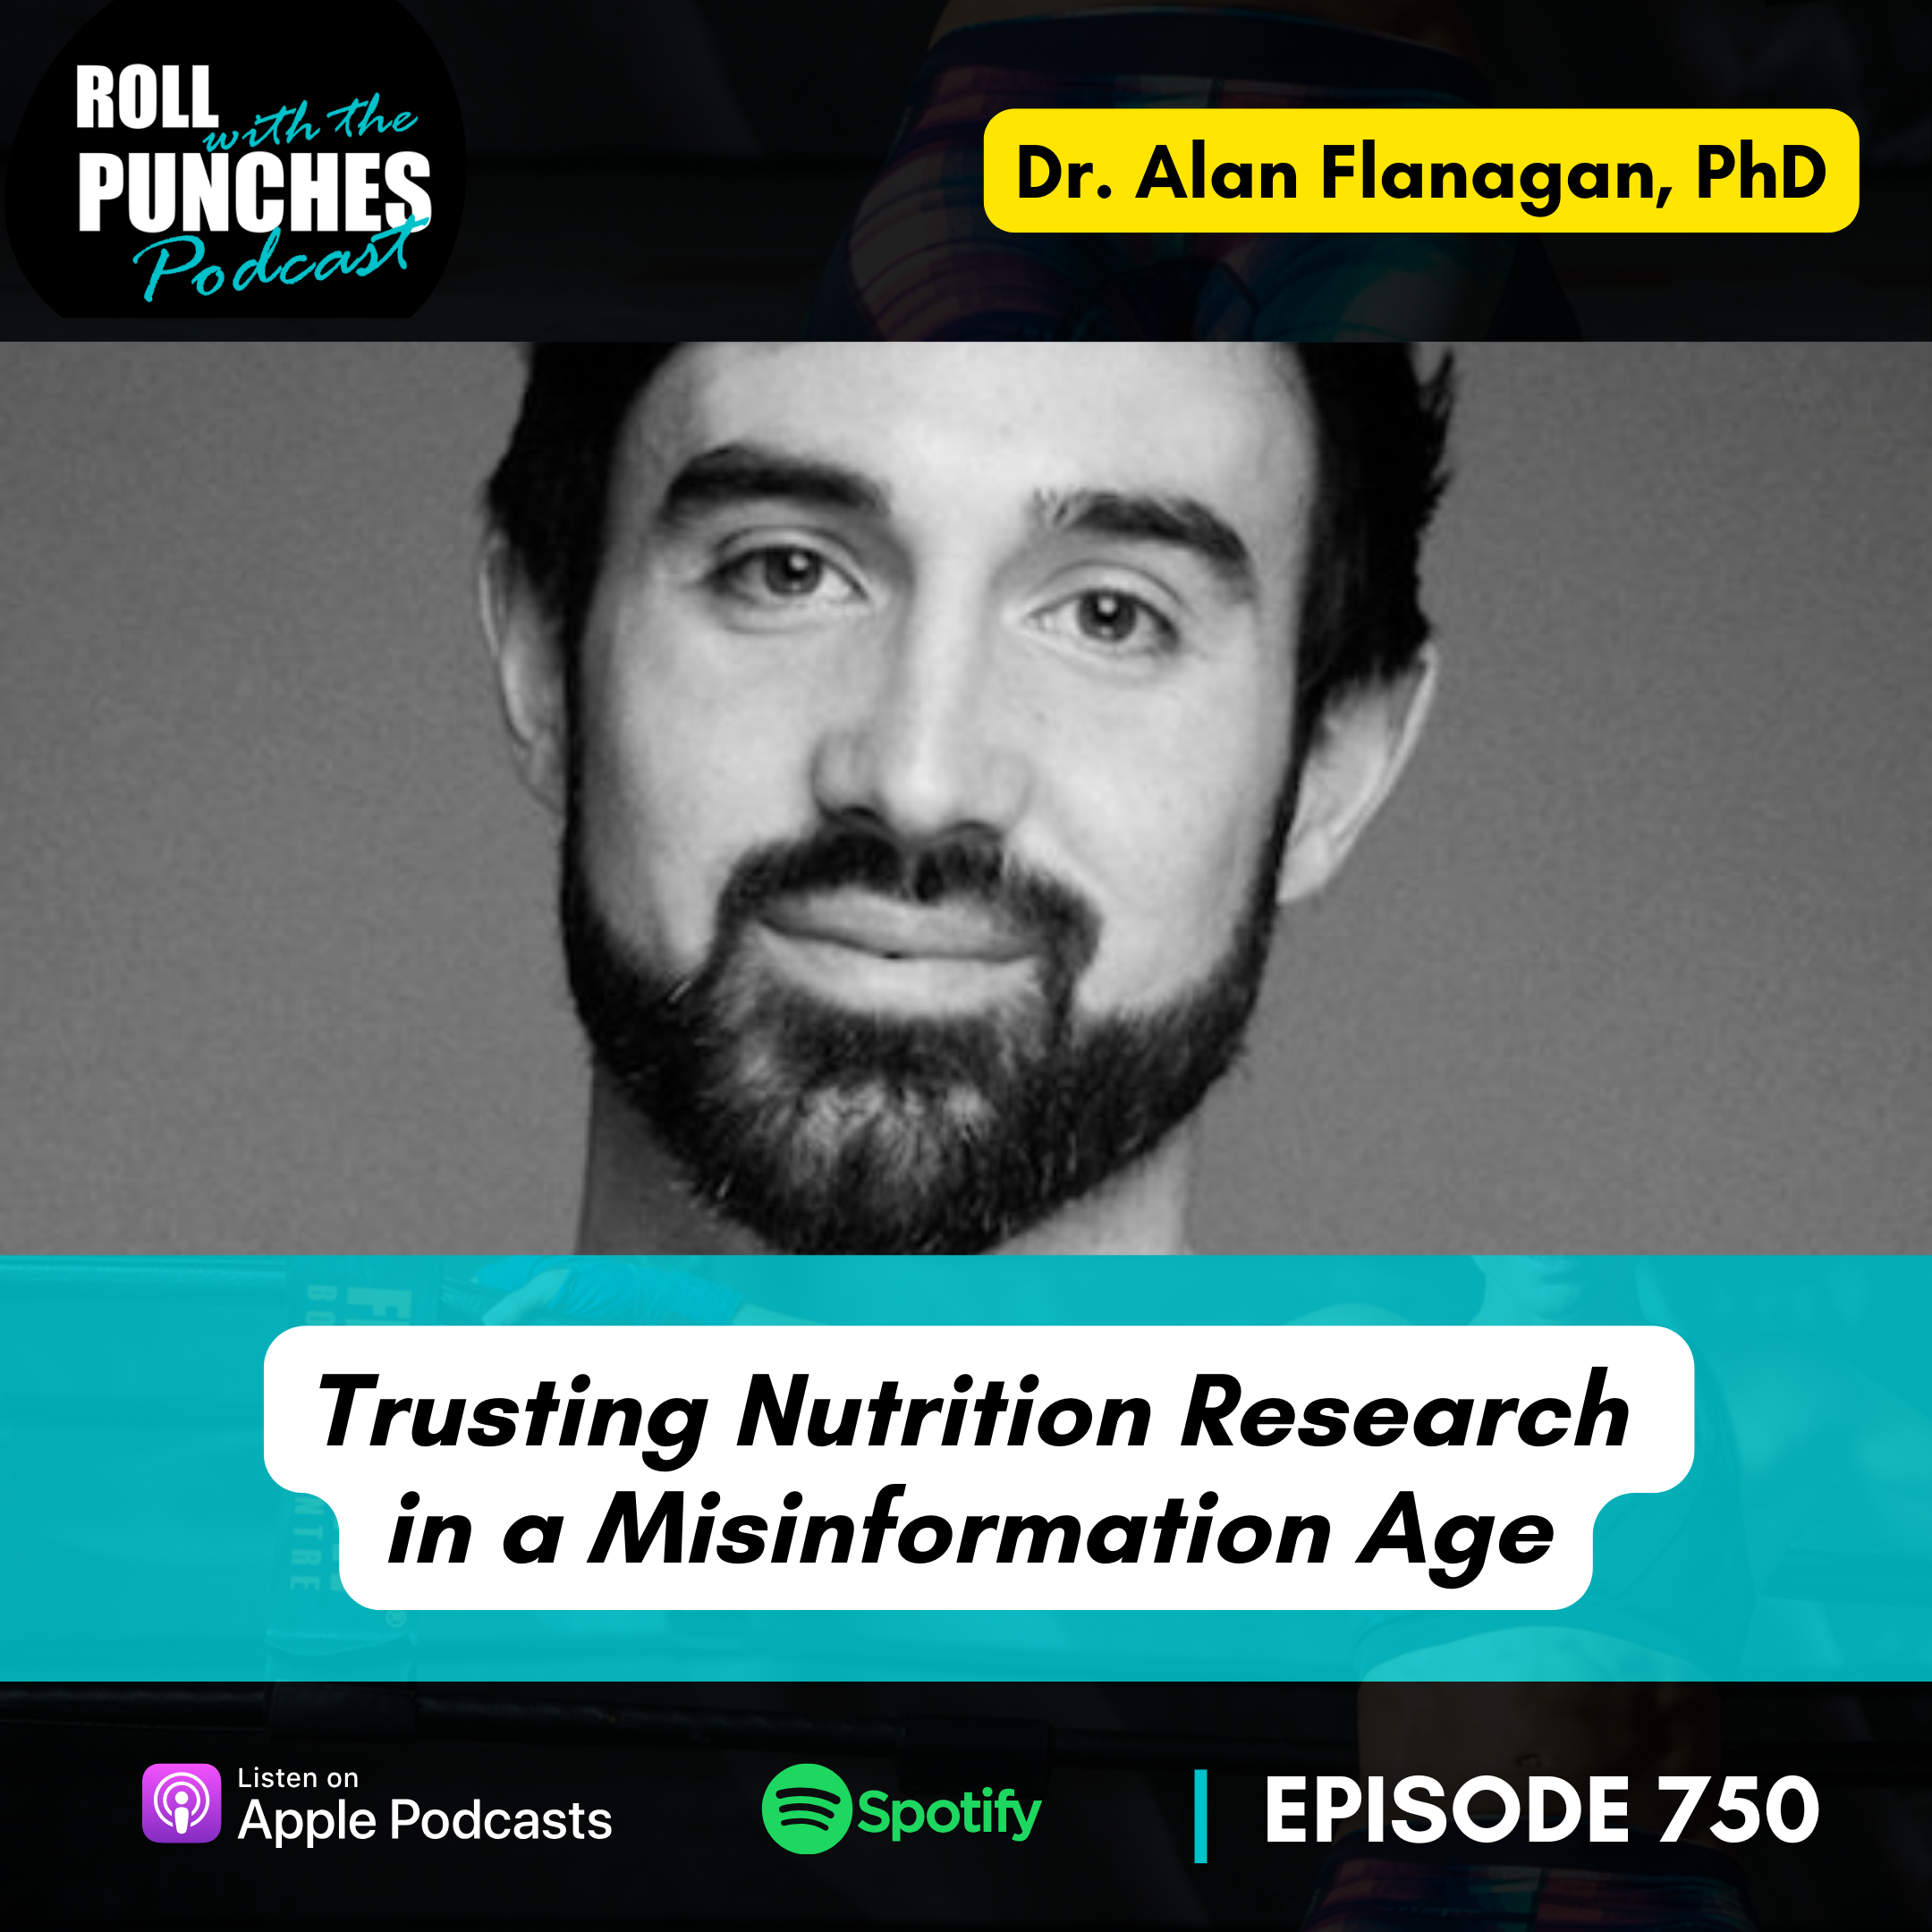 Trusting Nutrition Research in a Misinformation Age | Dr. Alan Flanagan, PhD - 750